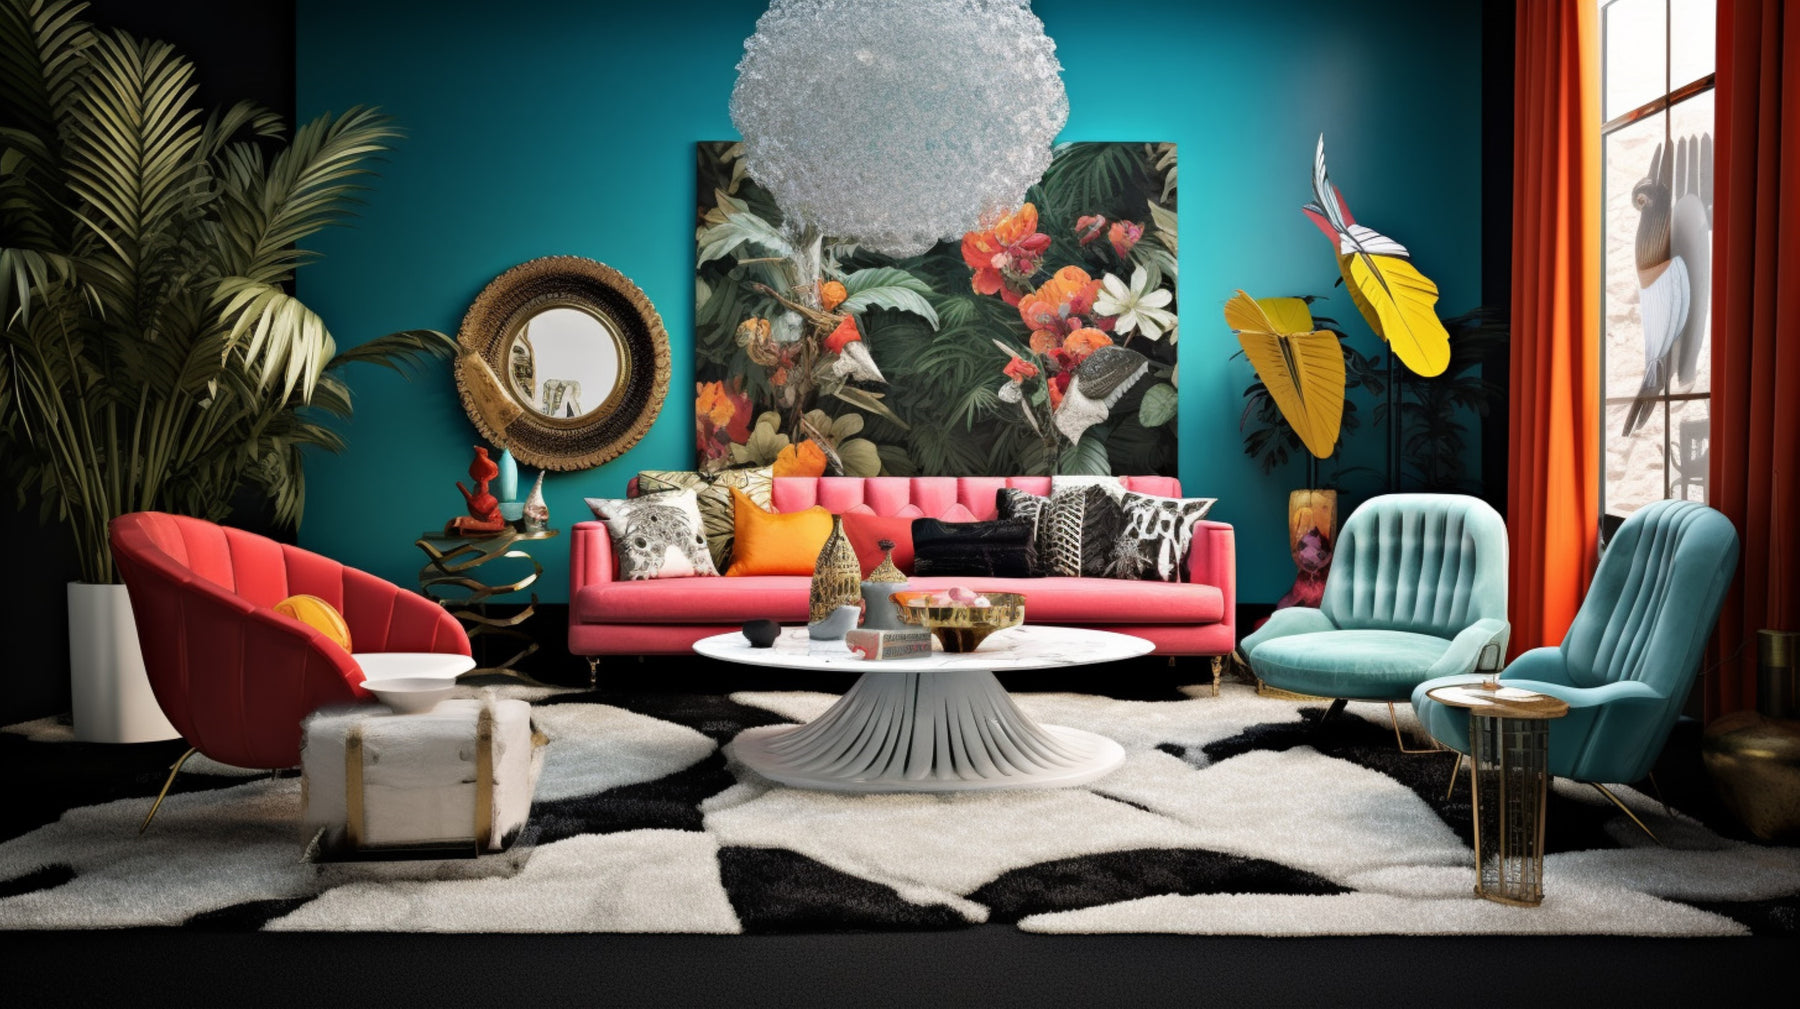 How to Mix and Match Furniture for an Eclectic Look